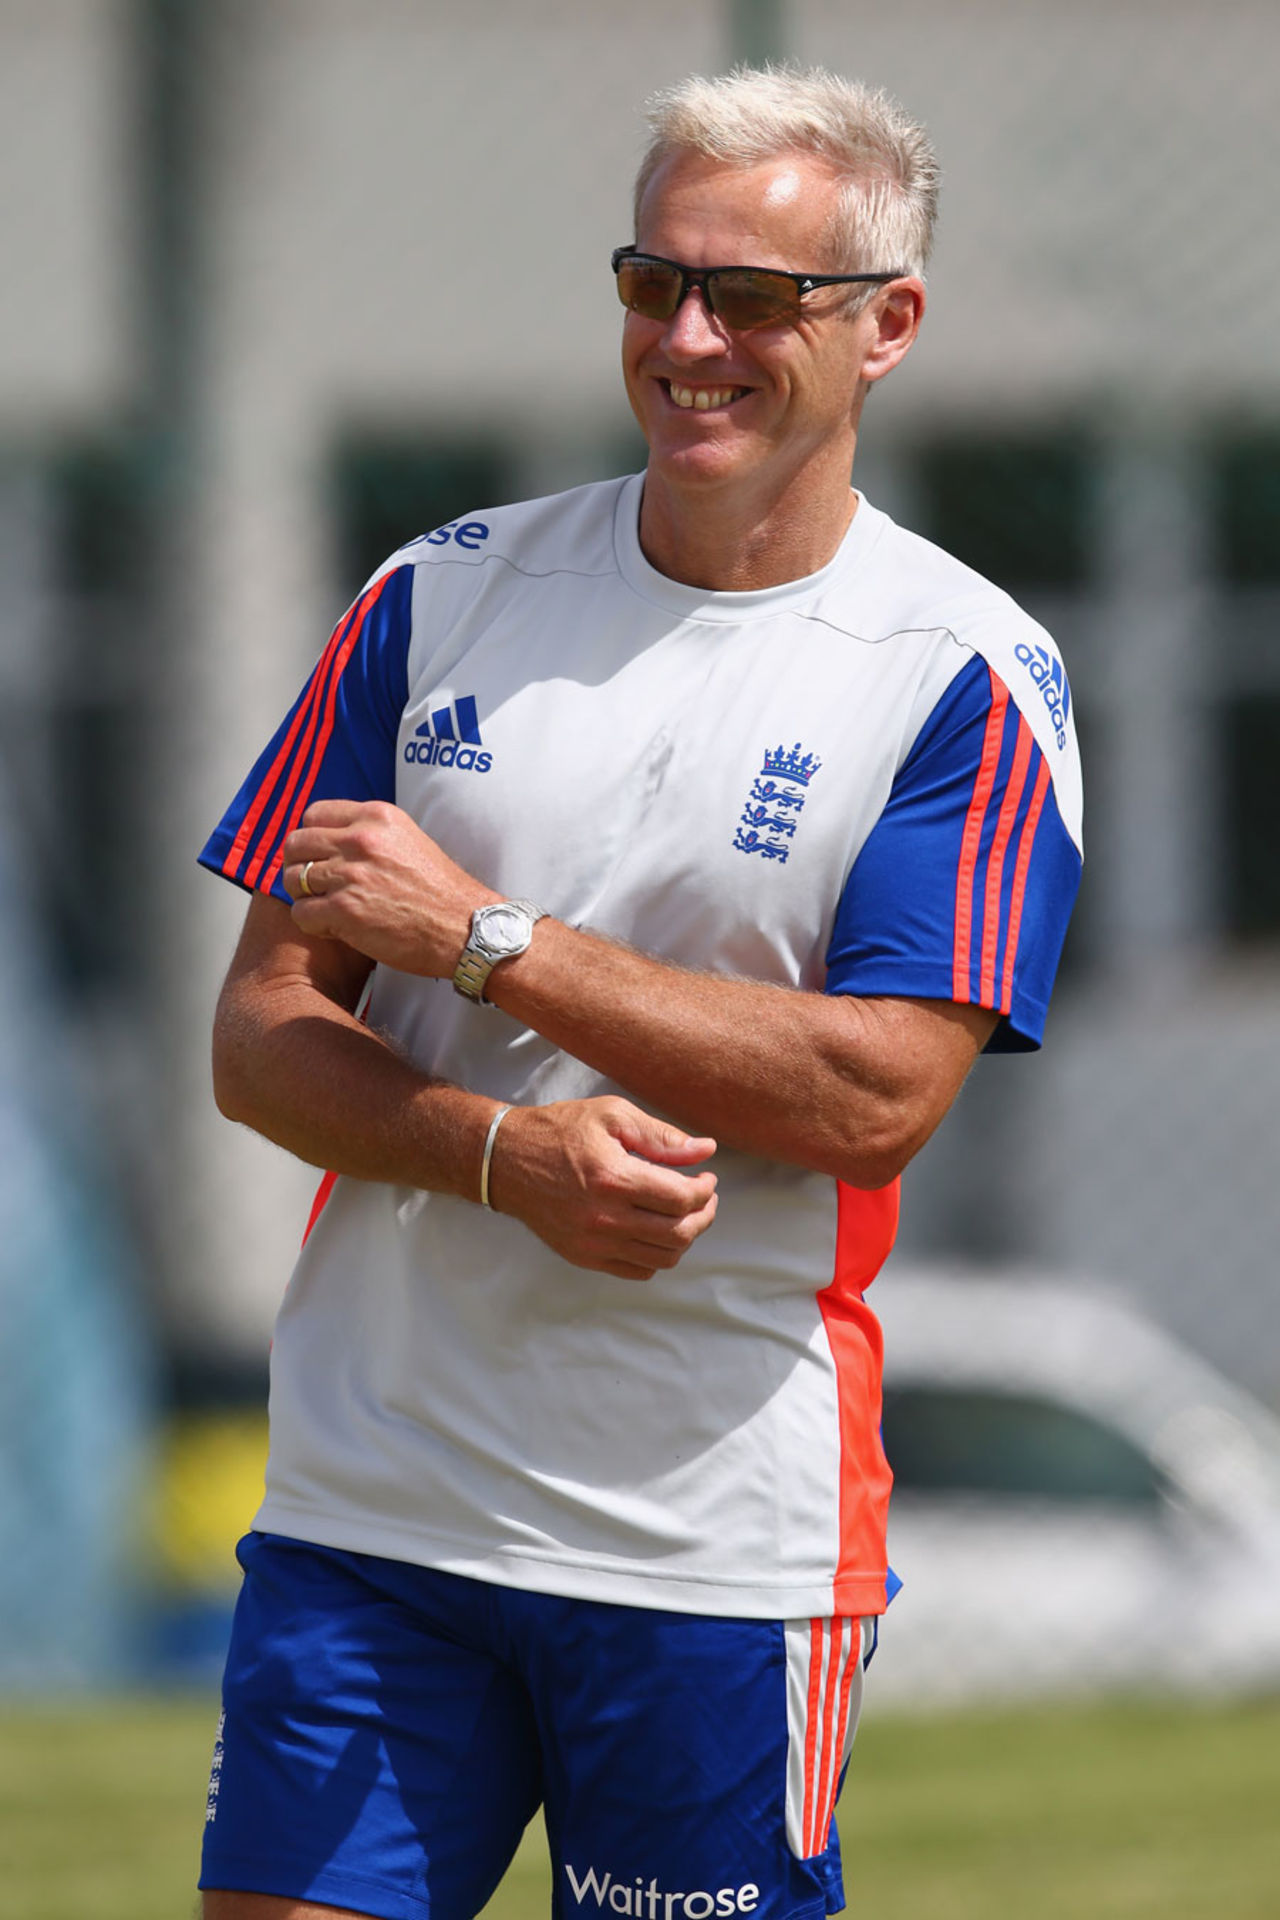 Peter Moores at England nets, Antigua, April 11, 2015